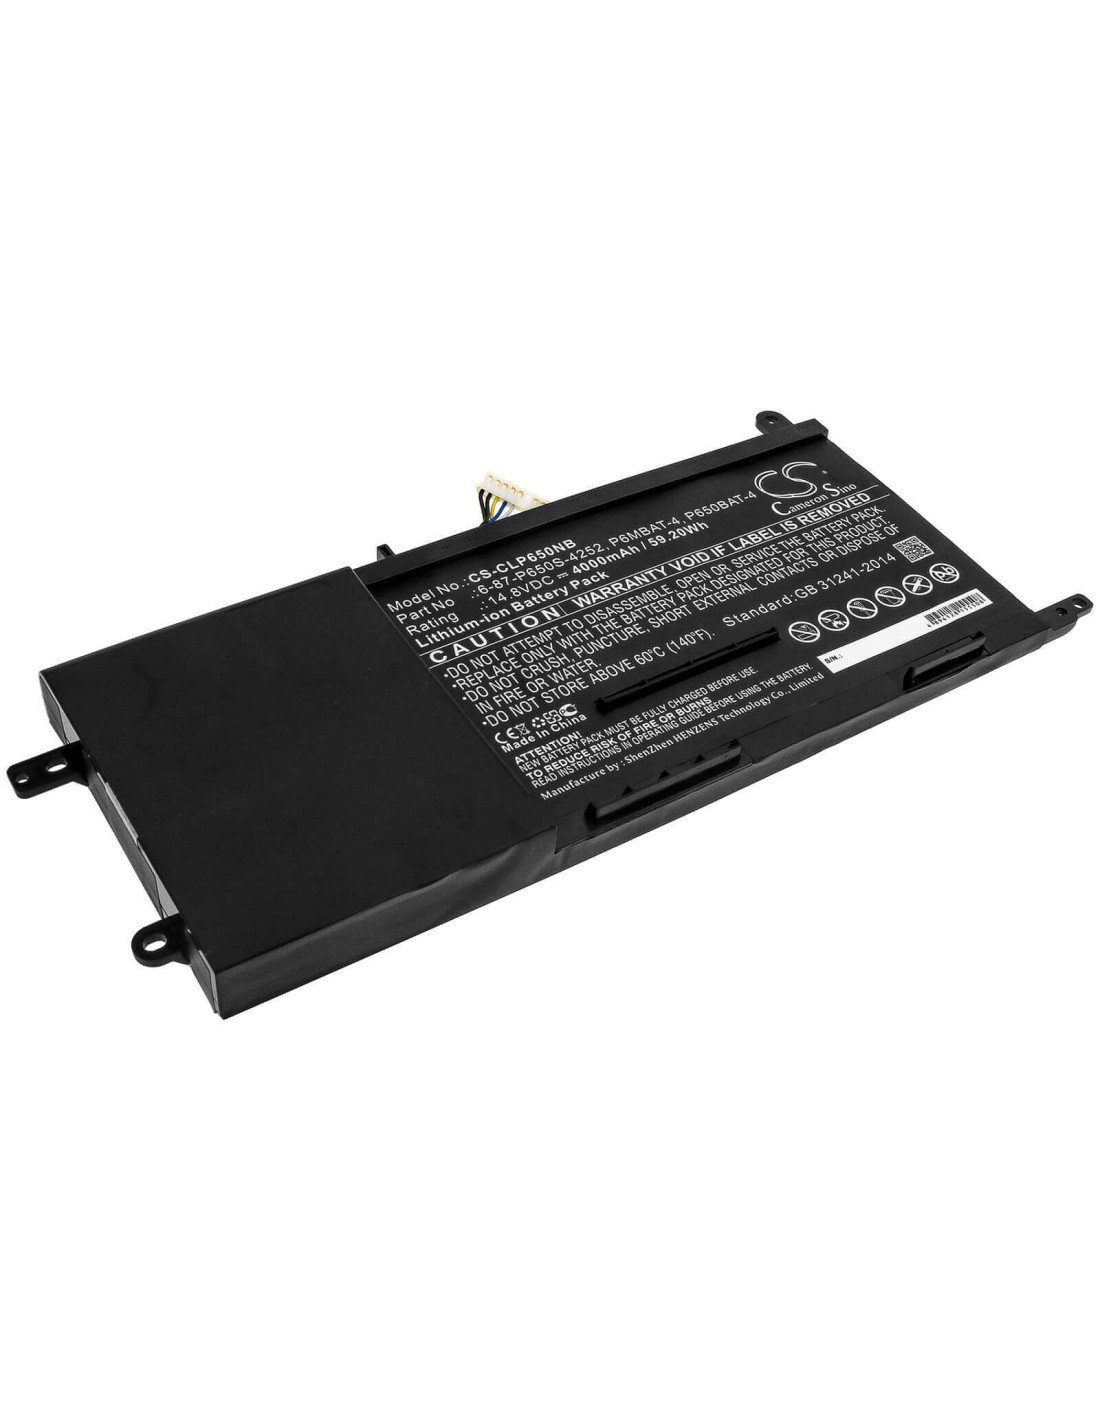 Battery for Advent, T5, Clevo, P650hp3-g 14.8V, 4000mAh - 59.20Wh